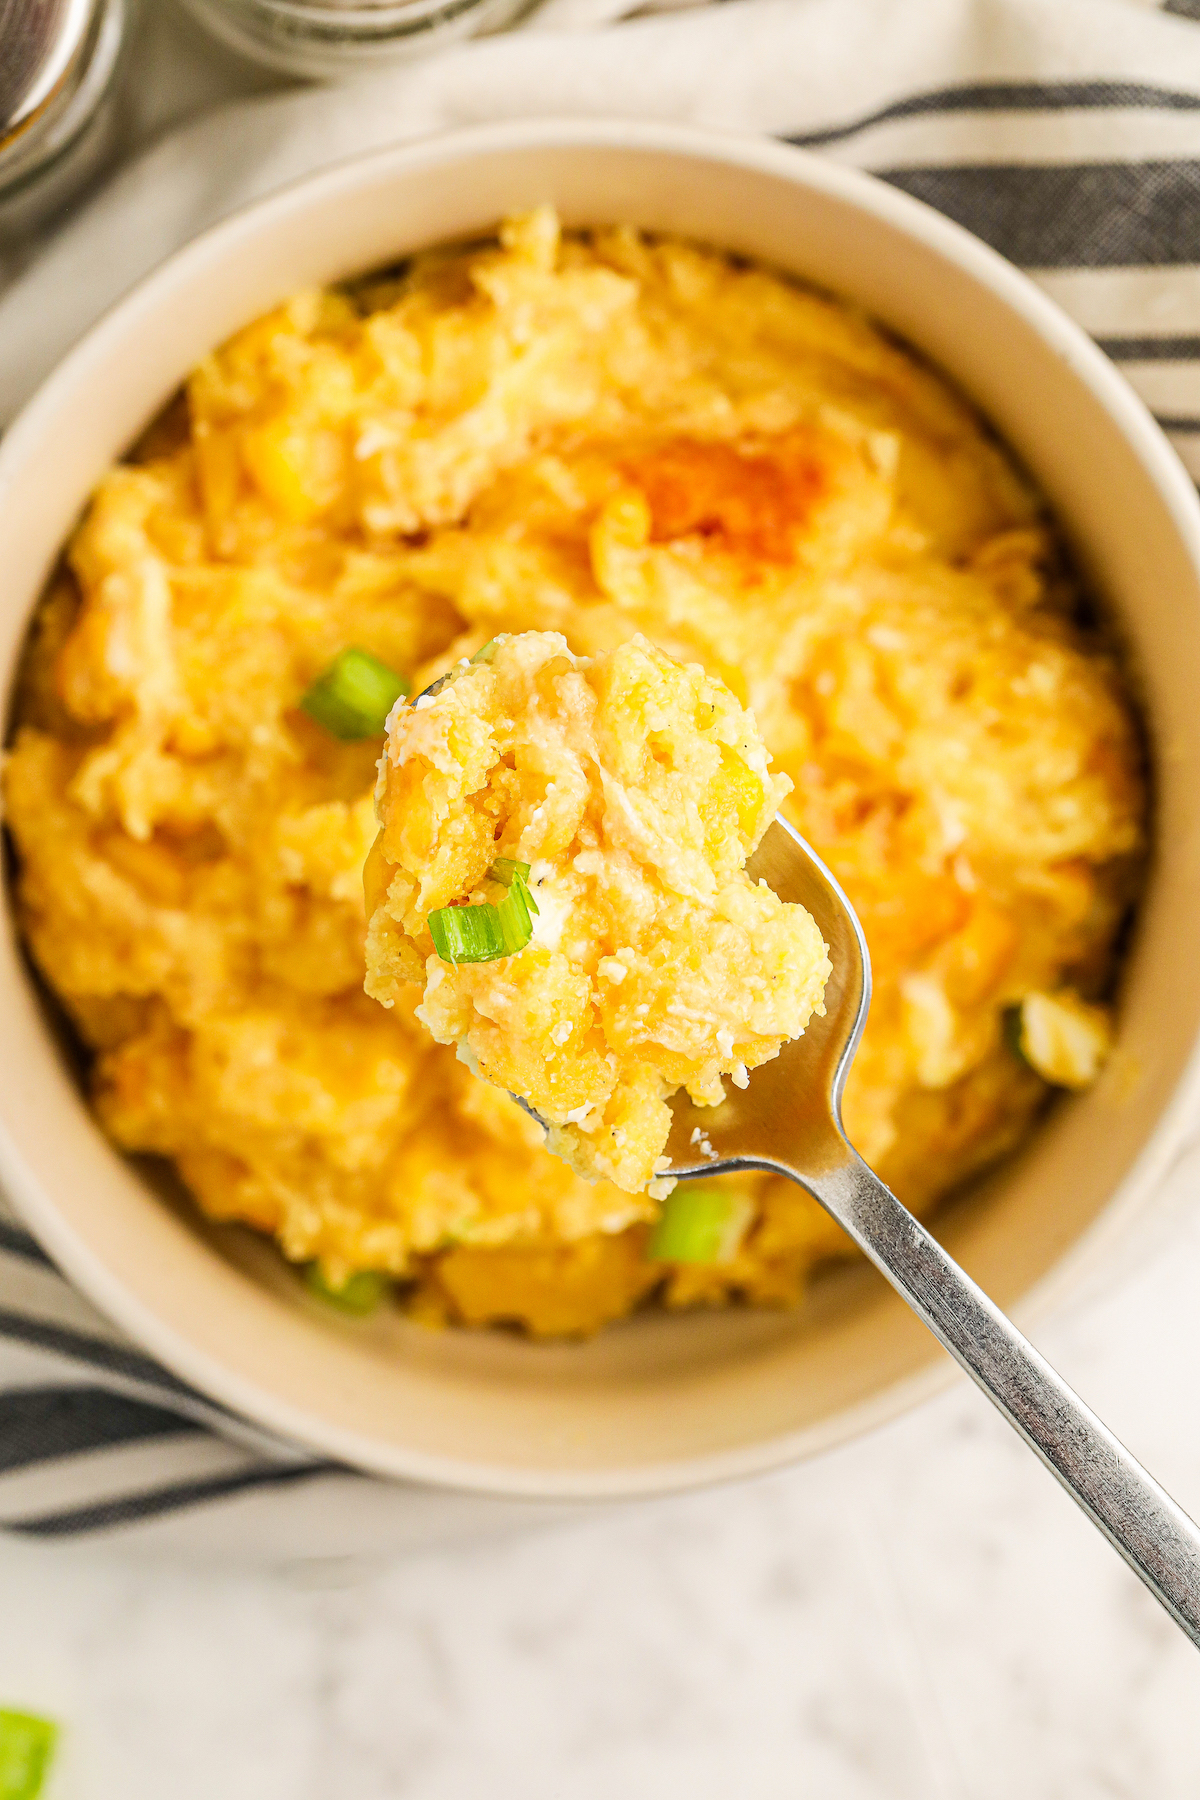 A bowl of sweet corn pudding with chopped green onions on top and a spoon scooping out a bite.